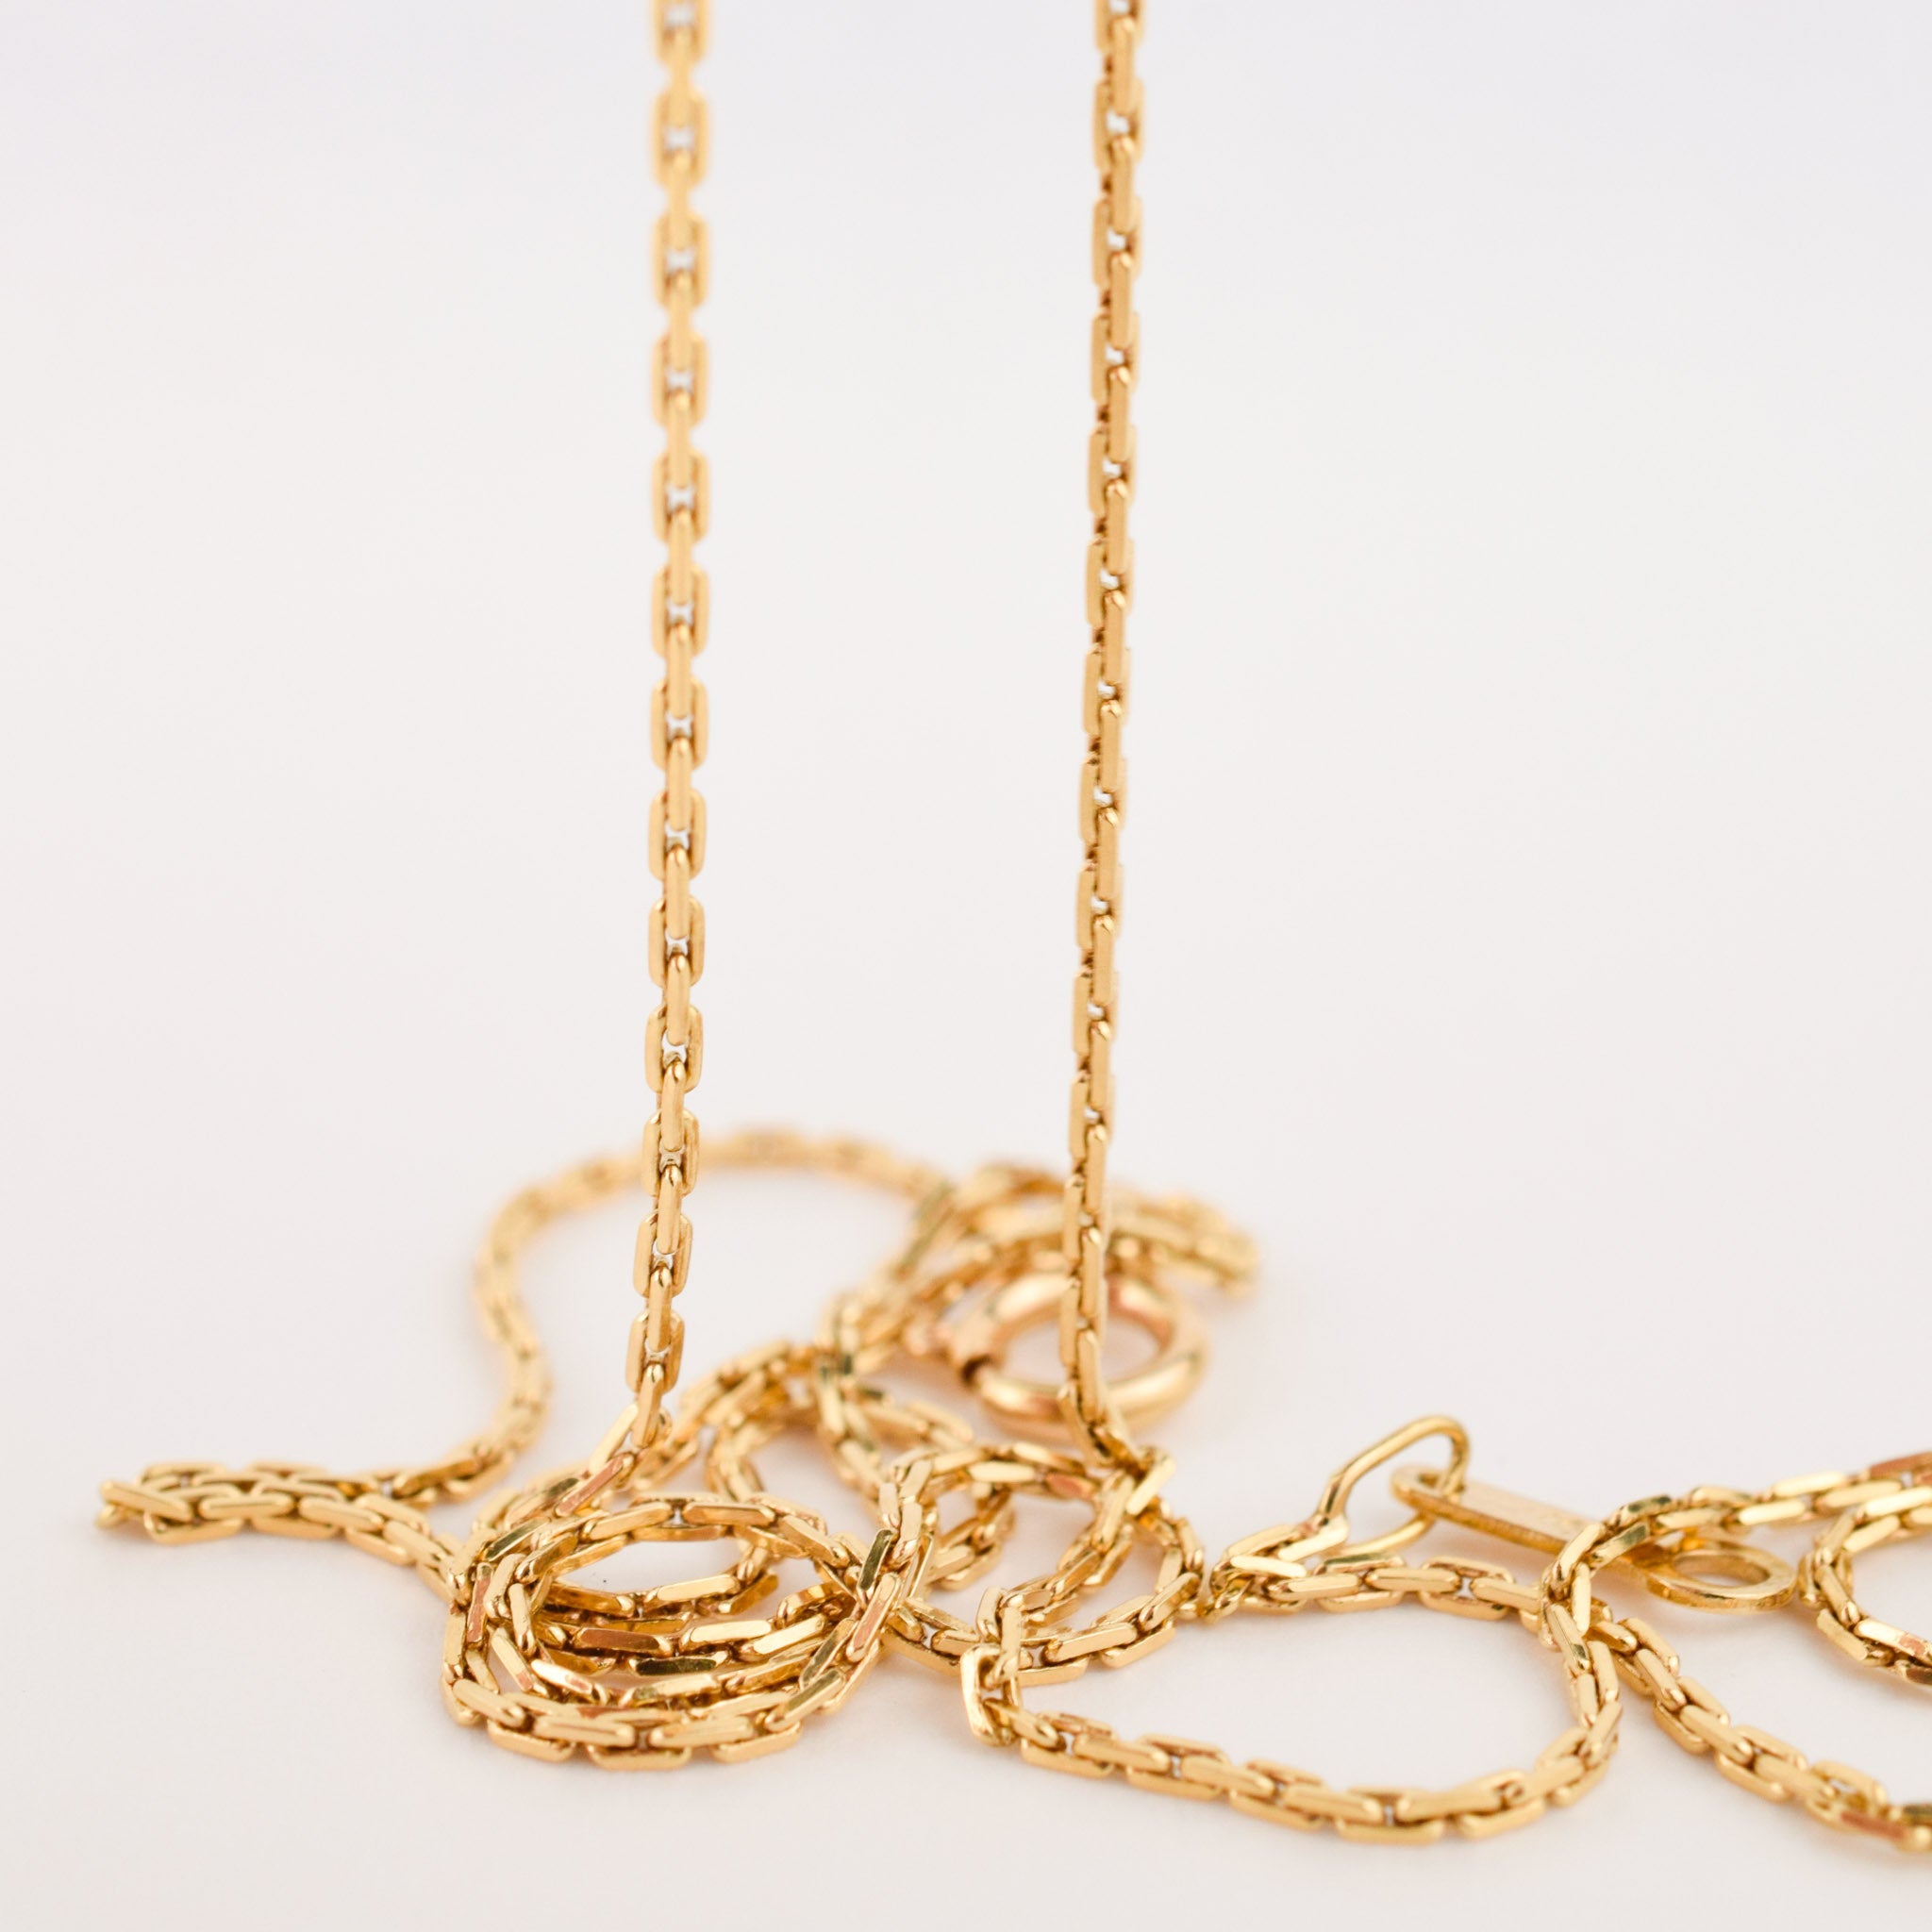 21" Dainty 18k Cable Link Chain Necklace